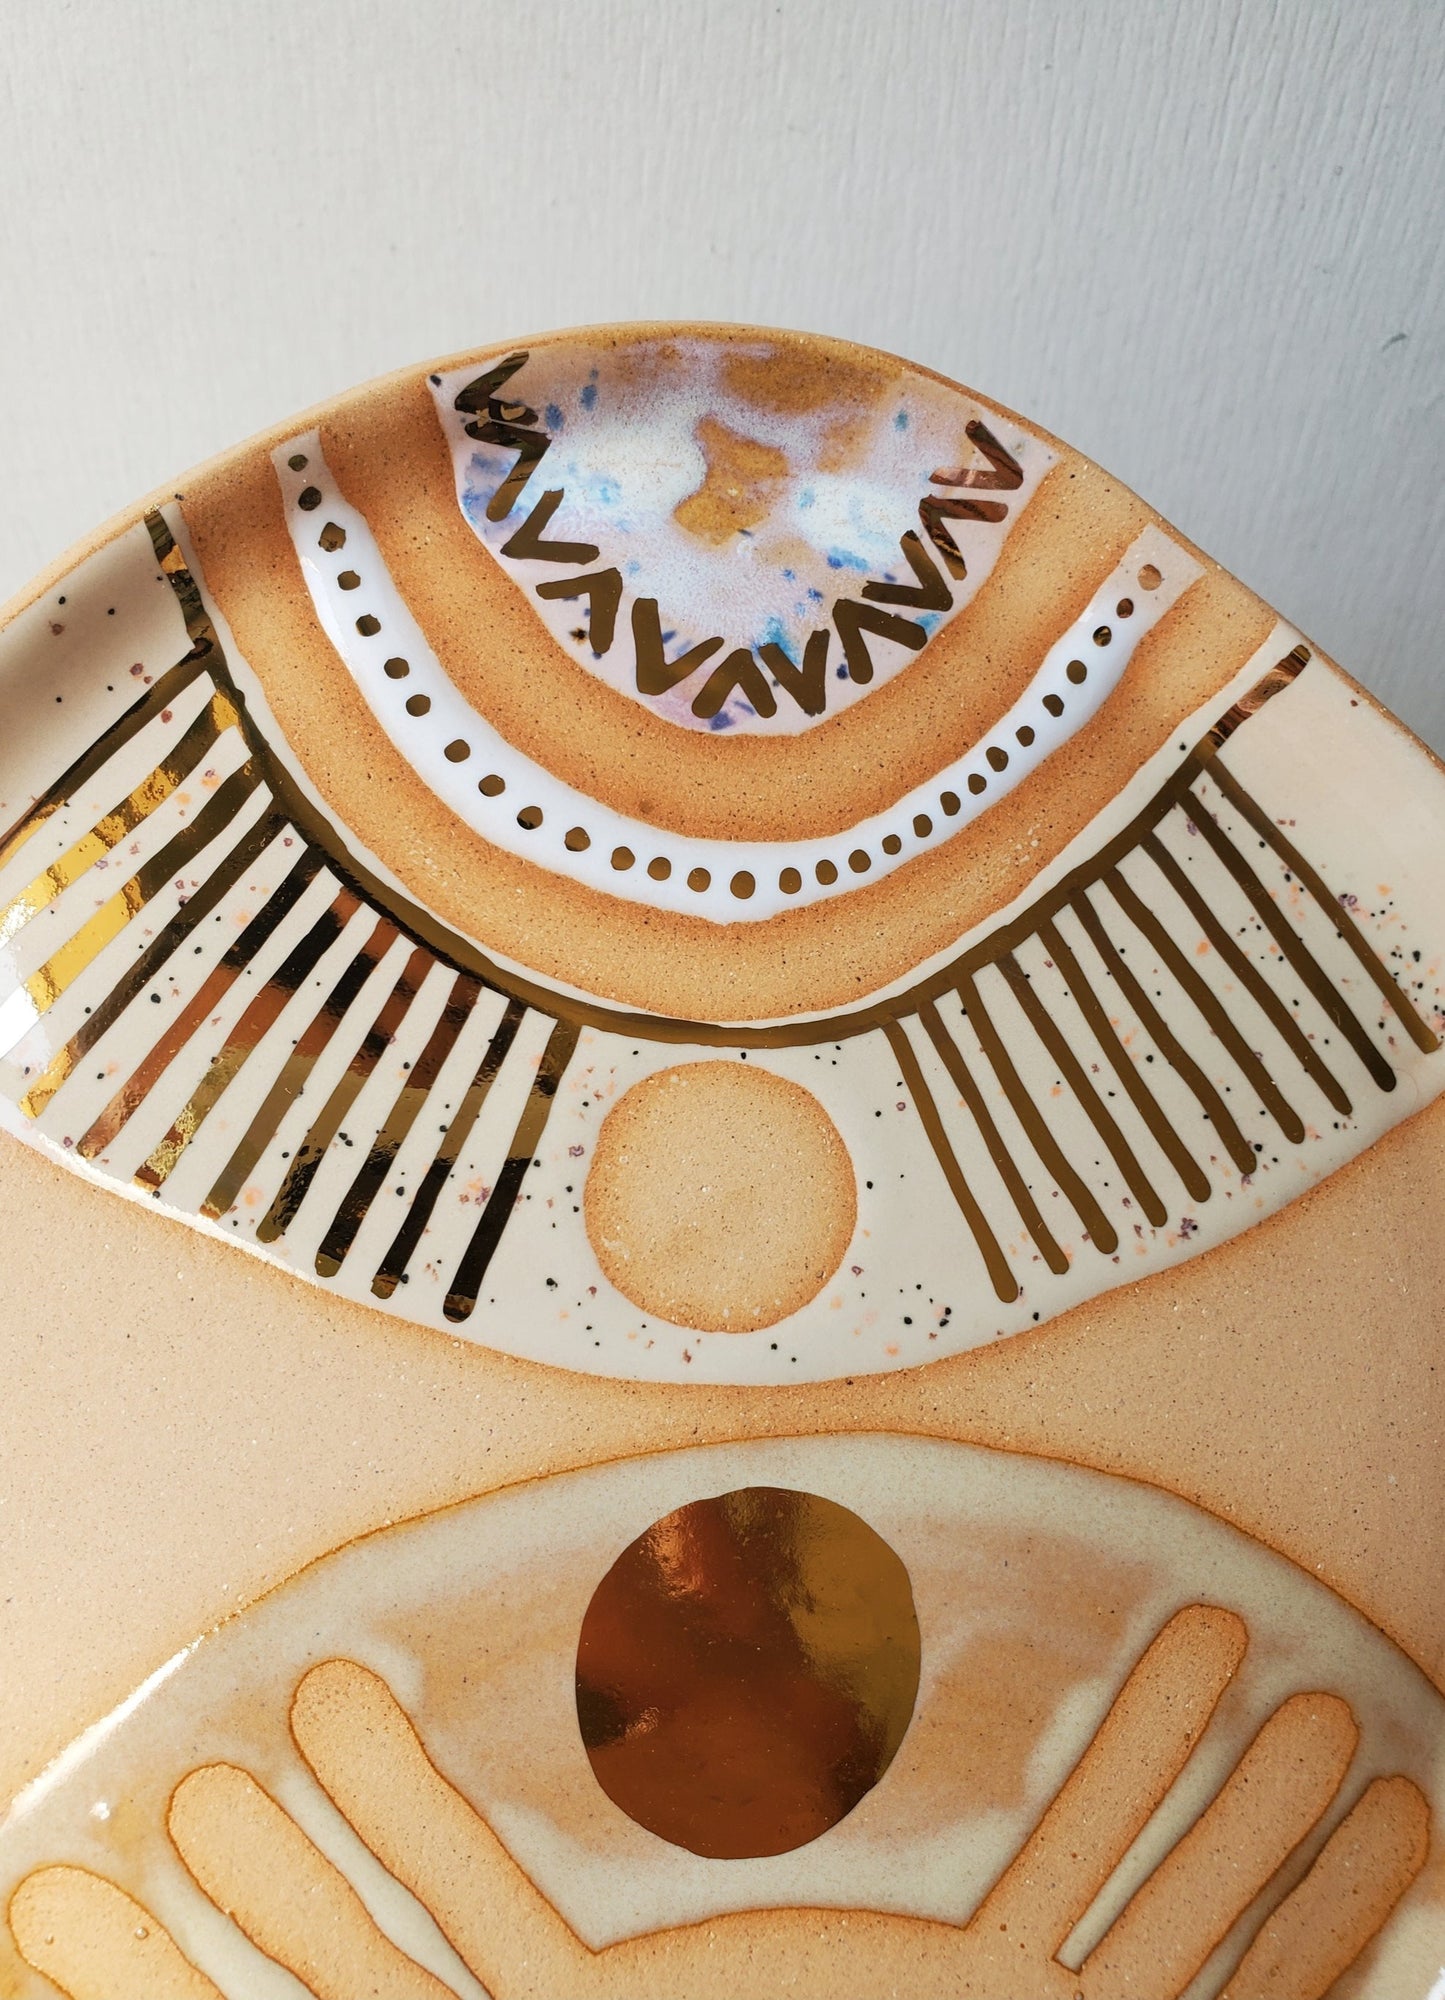 Handmade ceramic dish featuring fun designs and gold luster accents.